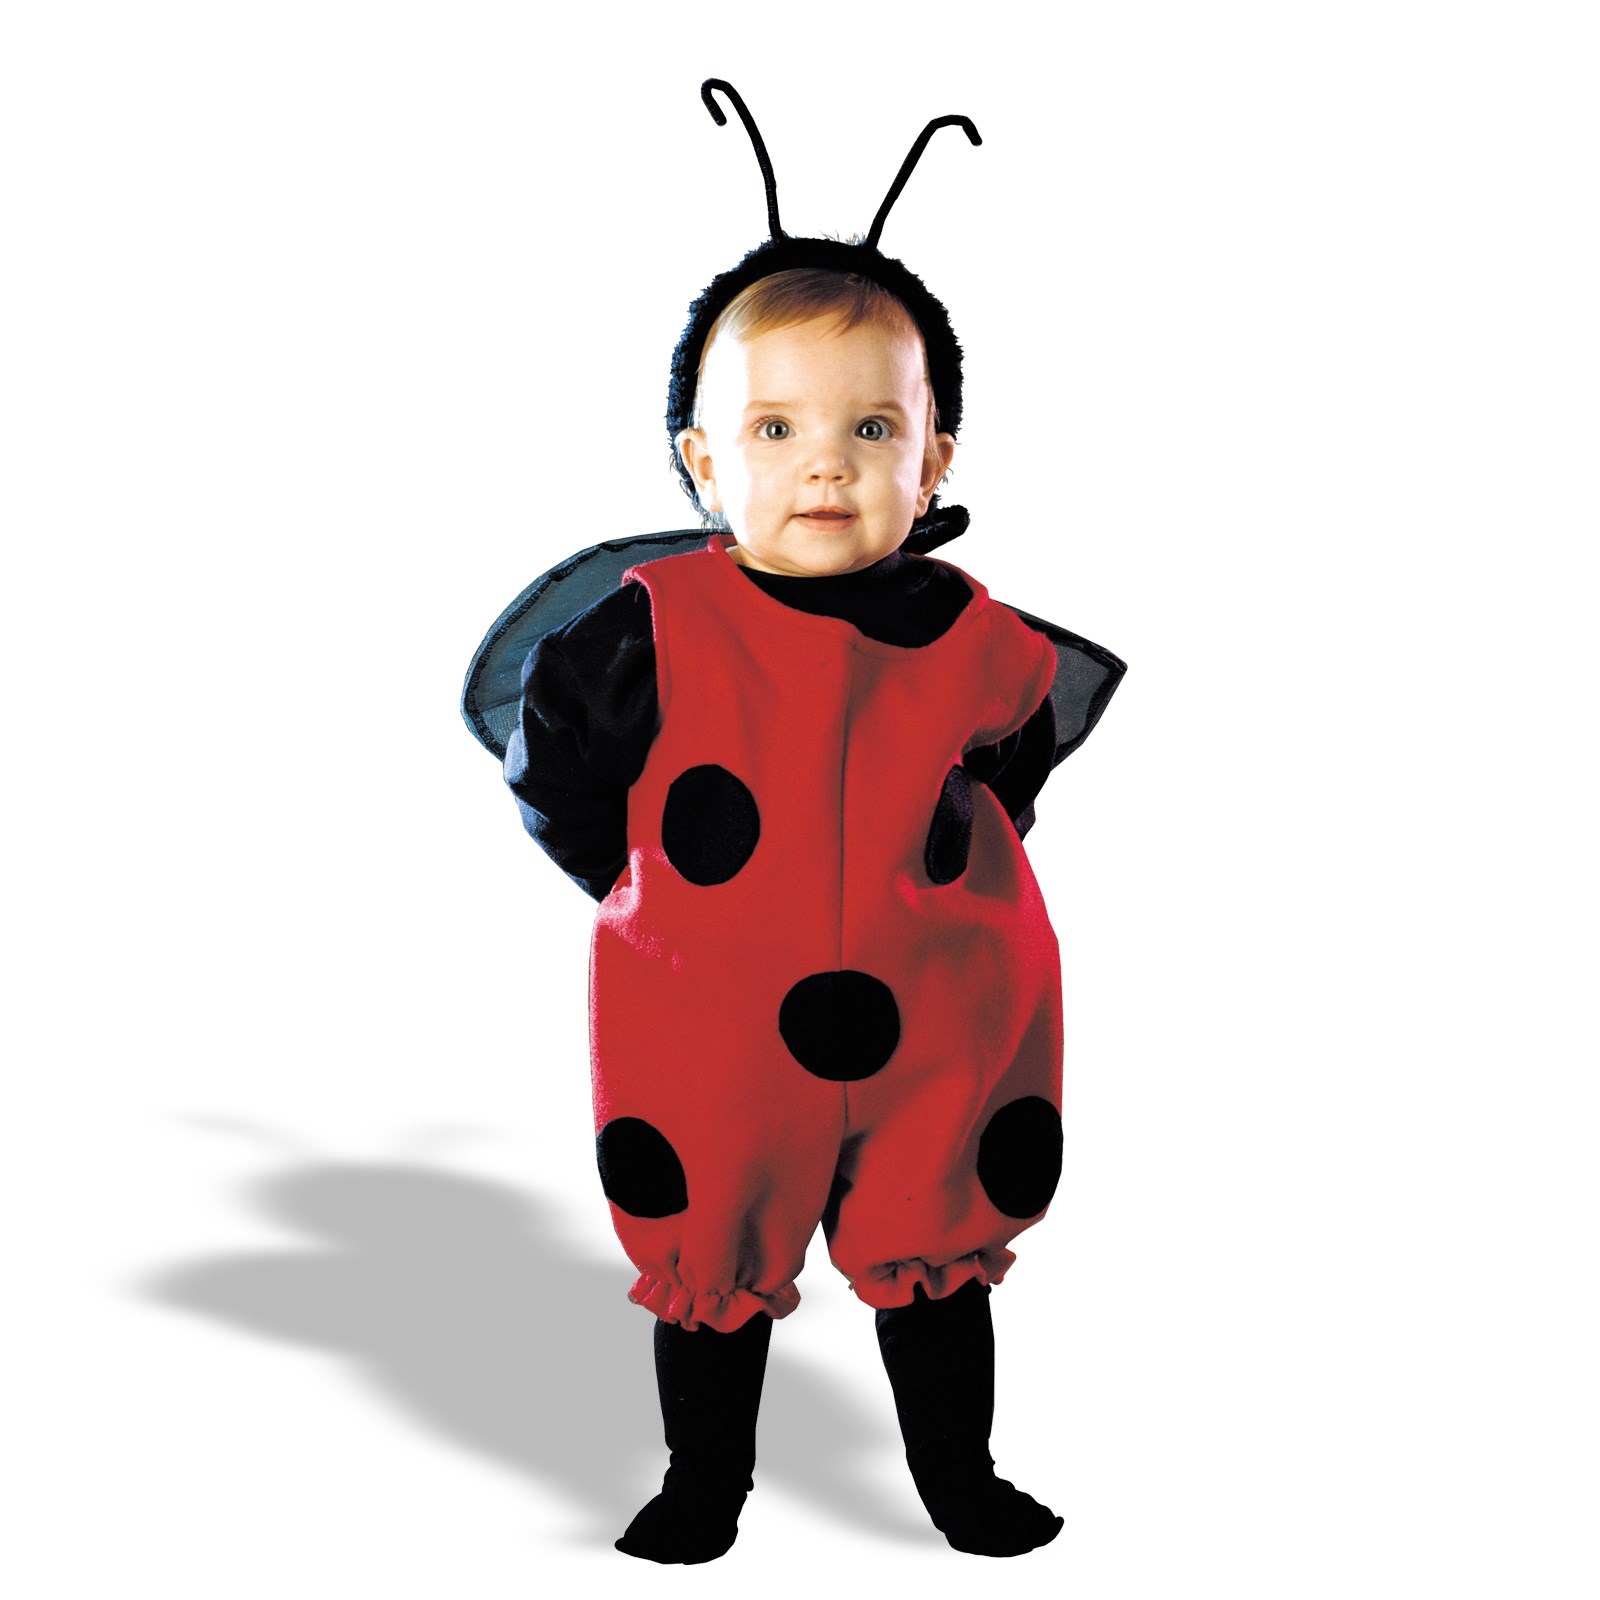 Adoption Announcement Cards on Little Lady Bug Toddler Costume   Baby Costume   Brand New Dad